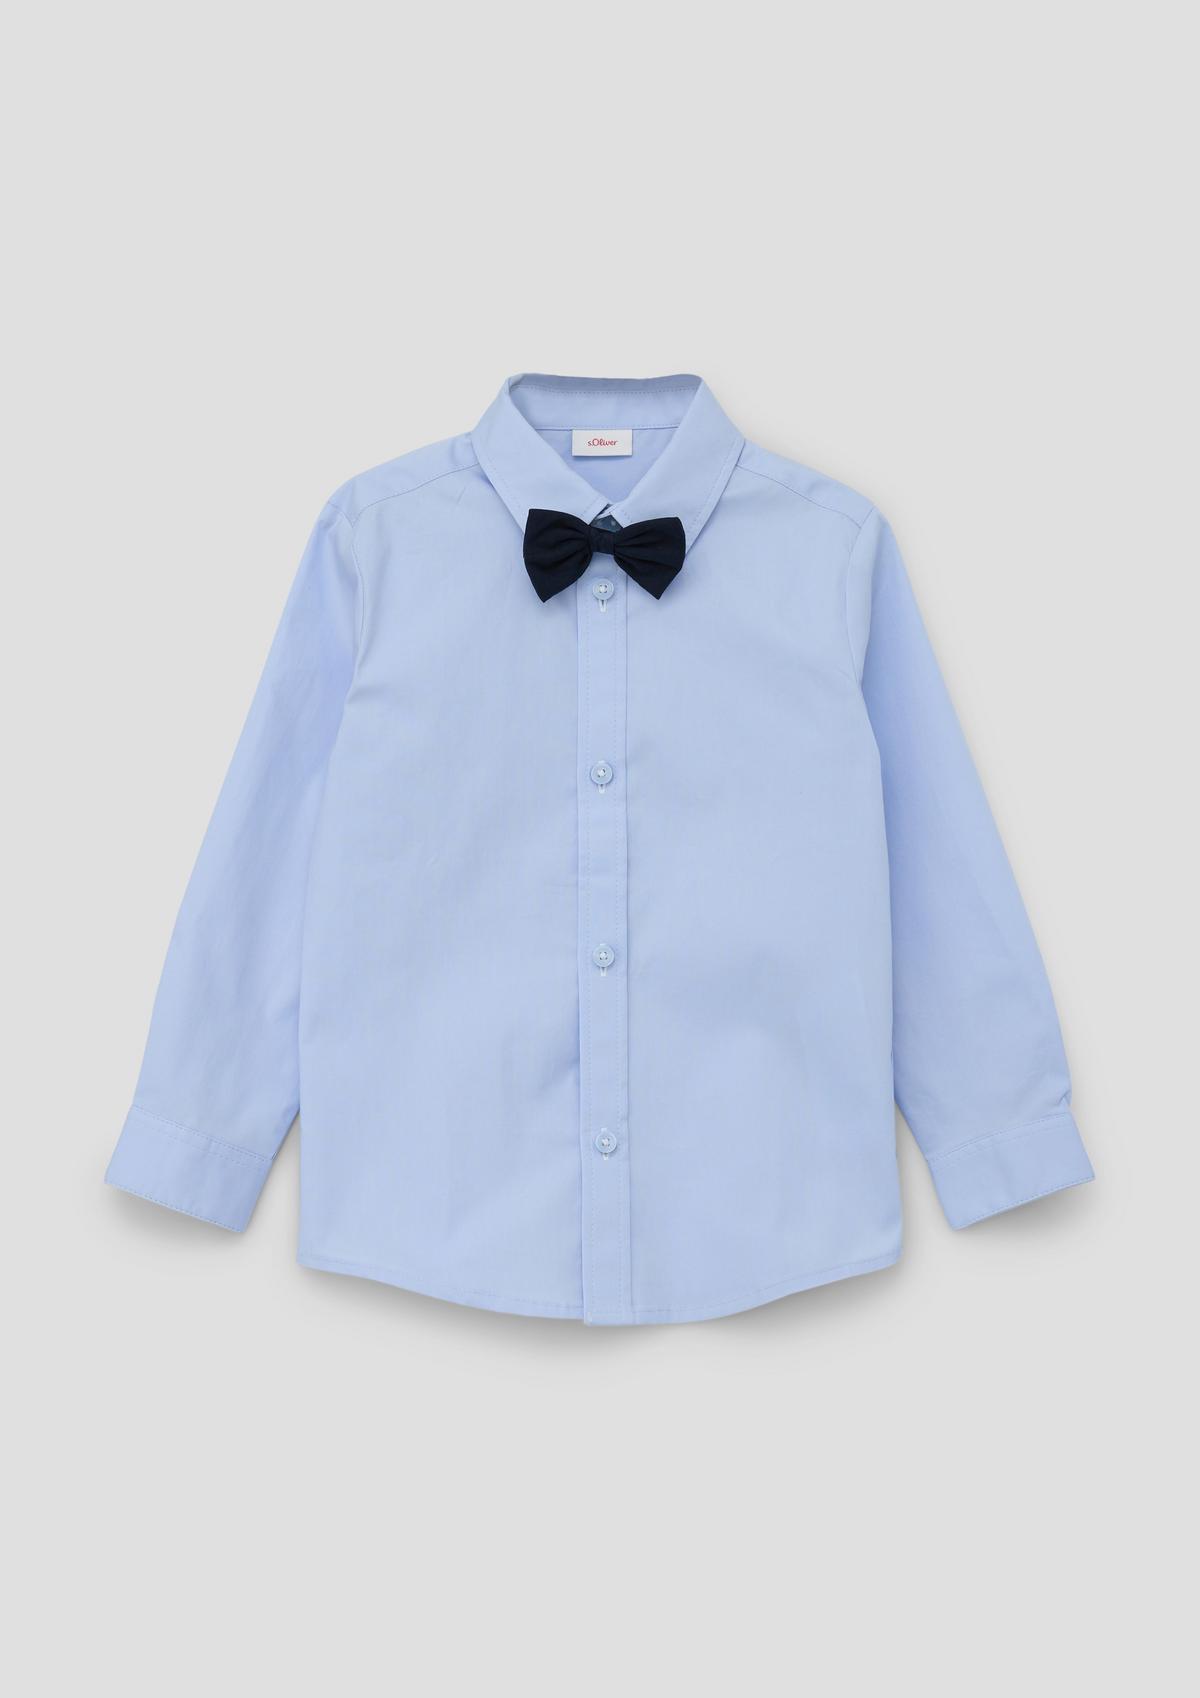 s.Oliver Shirt with a detachable bow tie